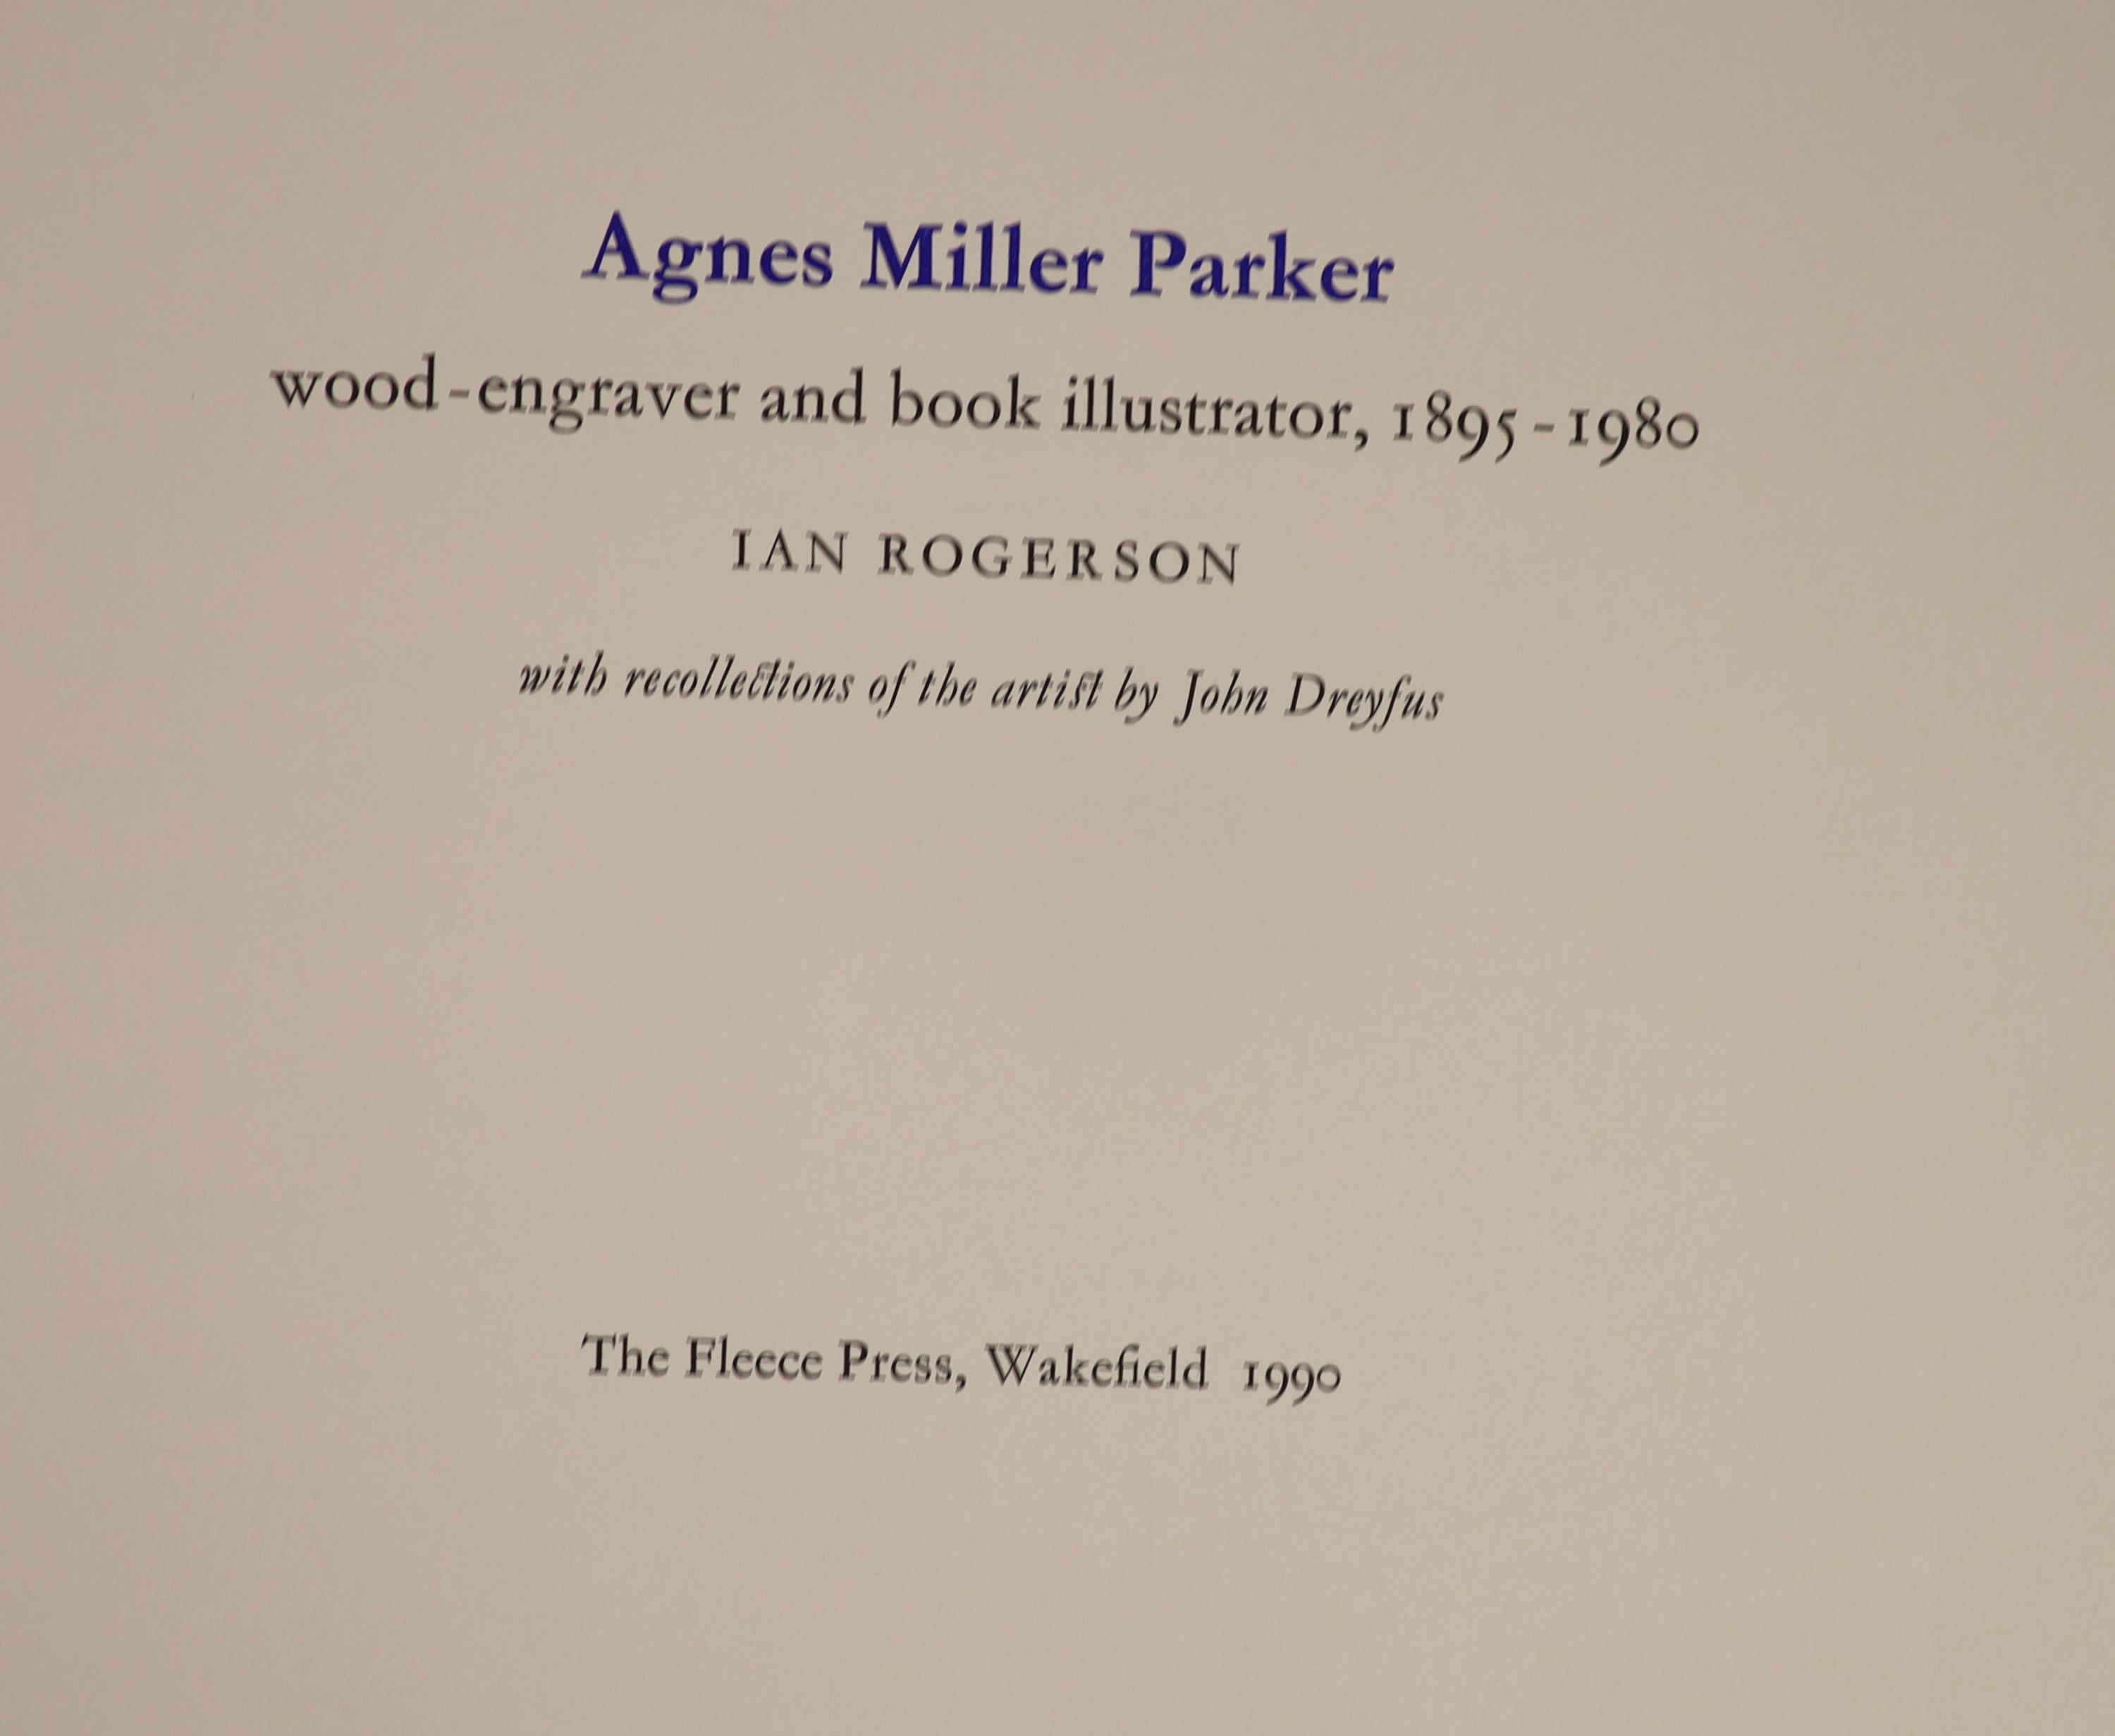 Rogerson, Ian - Agnes Miller Parker, wood engraver and book illustrator, 1895-1980, one of 300, original quarter cloth, with slip case, The Fleece Press, Wakefield, 1990